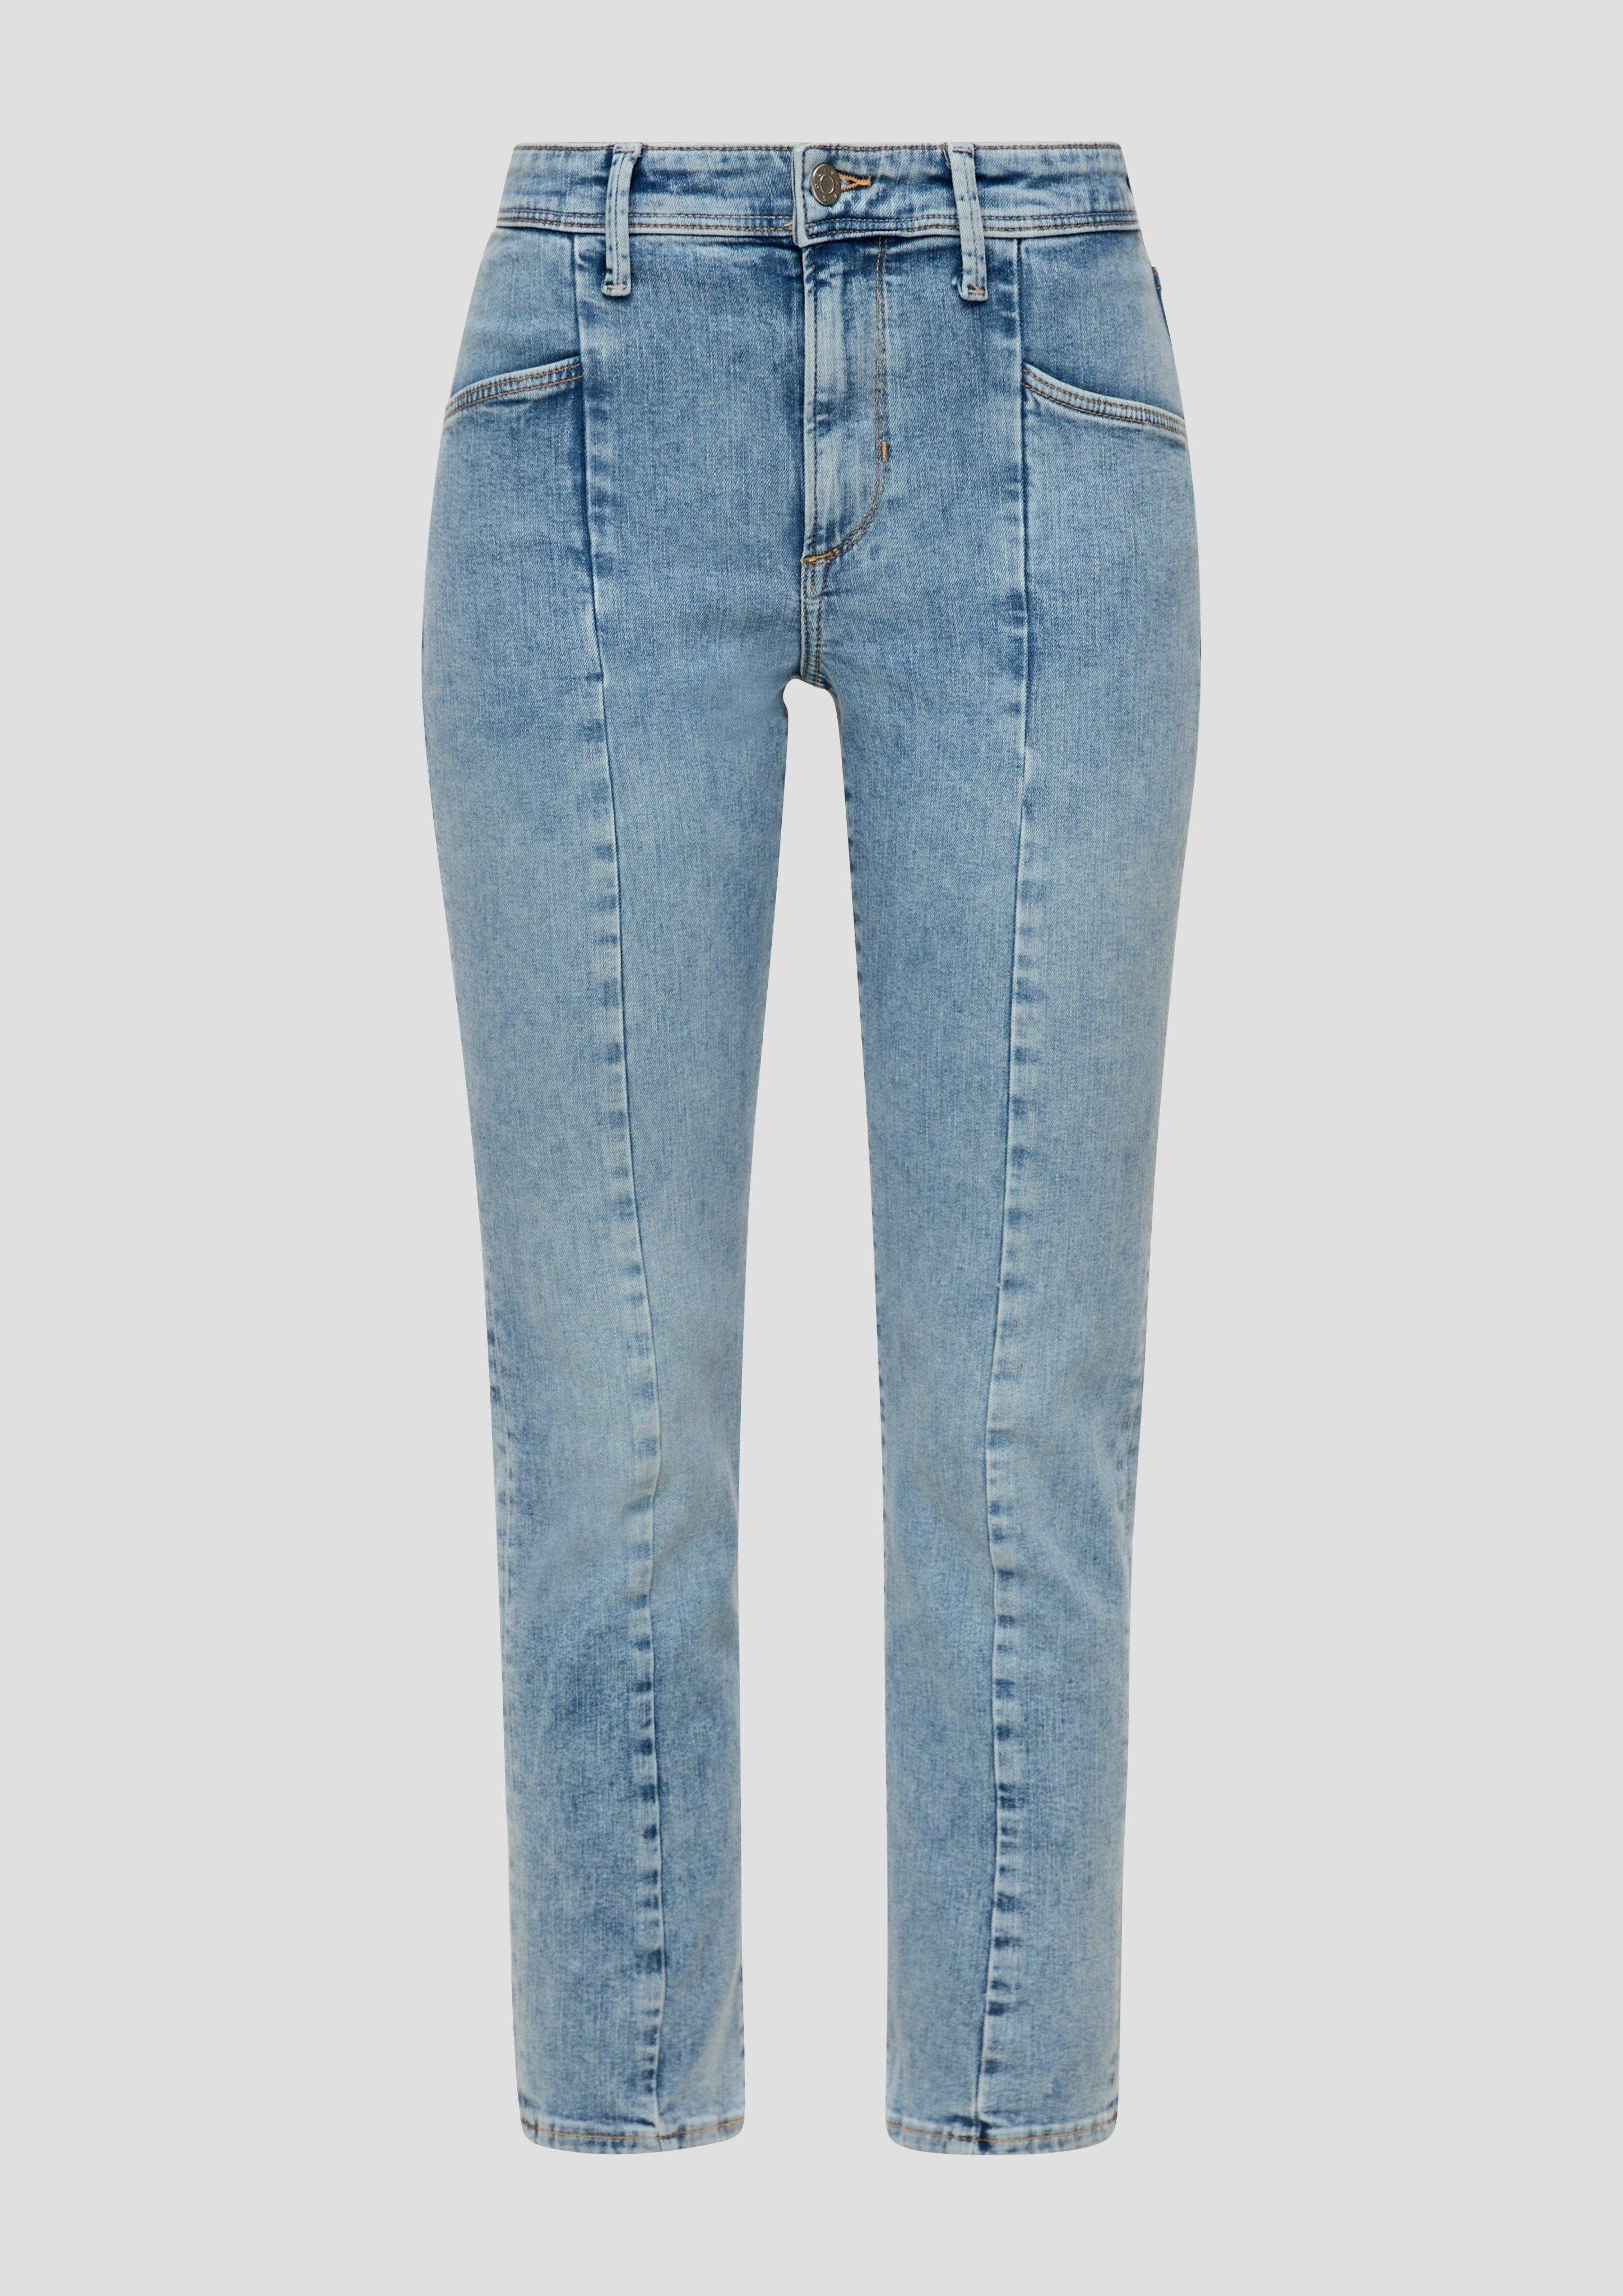 Leg / Ankle Waschung, / Slim Fit / Slim Rise 7/8-Jeans Mid Teilungsnähte Label-Patch, s.Oliver Jeans